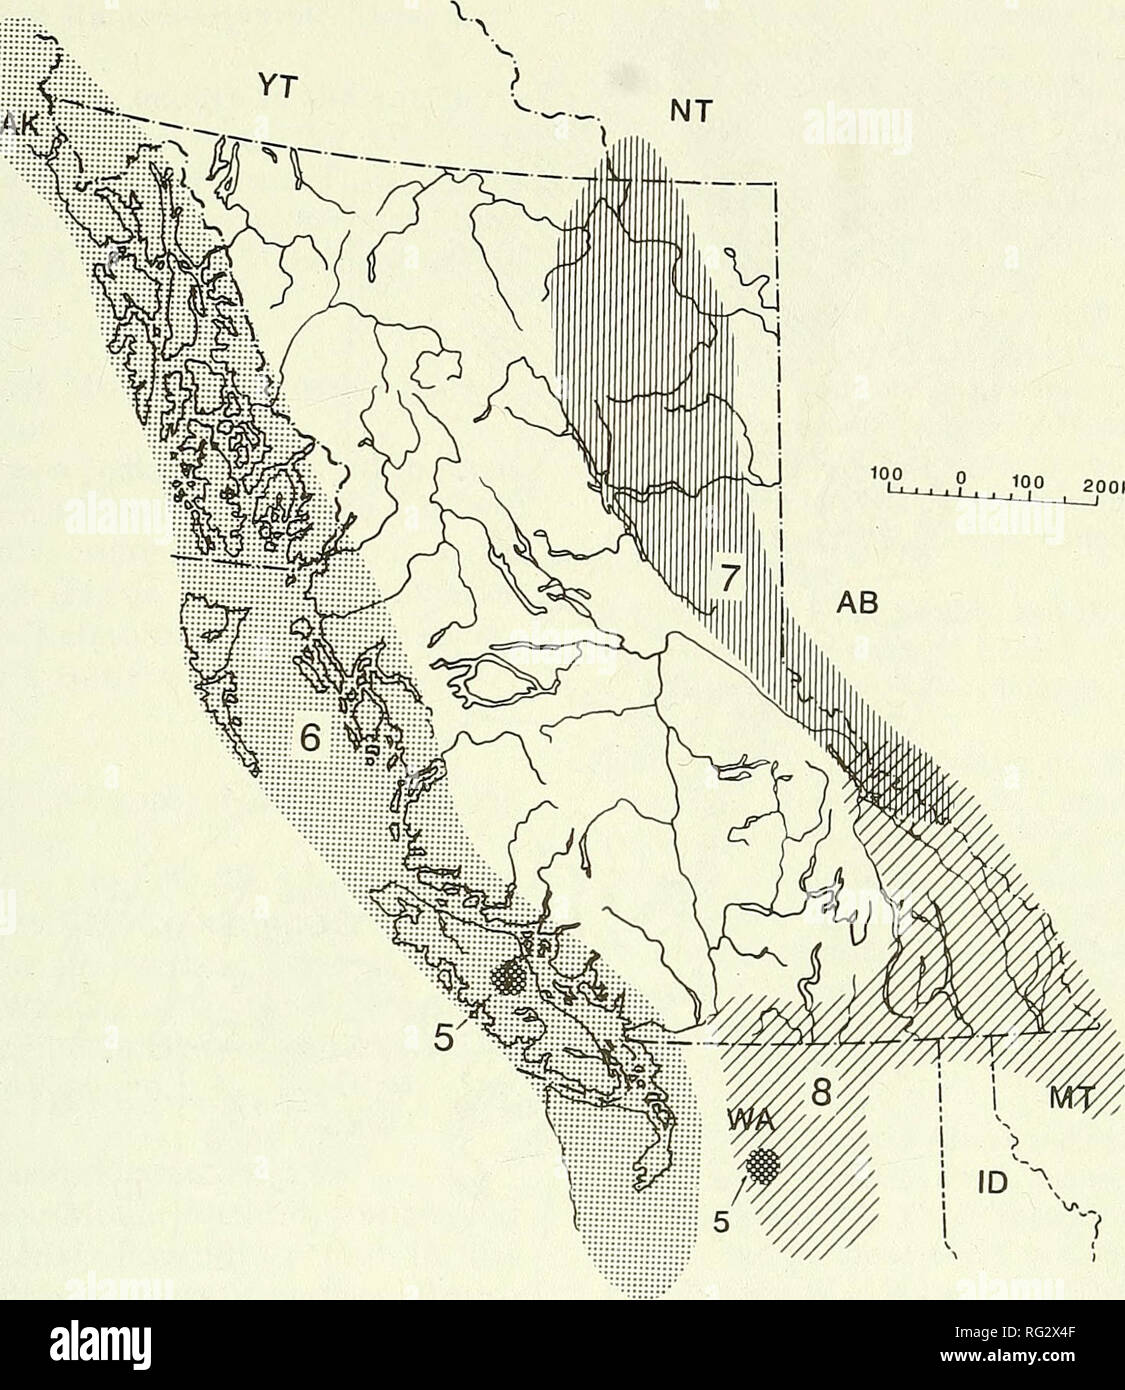 . The Canadian field-naturalist. 1996 Douglas: Endemic Vascular Plants of British Columbia 389. Figure 2. Endemic elements of British Columbia and immmediately adjacent regions. 5 - Vancouver Island Ranges-North Cascades, 6 - North Pacific Coast. 7 - Northern Rocky Mountains, 8 - Cascade Mountains-Rocky Mountains. occurs on the southeast coast of Vancouver Island and in the lower Fraser River Valley. Limnanthes macounii ranges along the southeastern coast of Vancouver Island as well as on some of the adjacent islands. 3. Coast Mountains-North Cascade Mountains- Selkirk Mountains Region This re Stock Photo